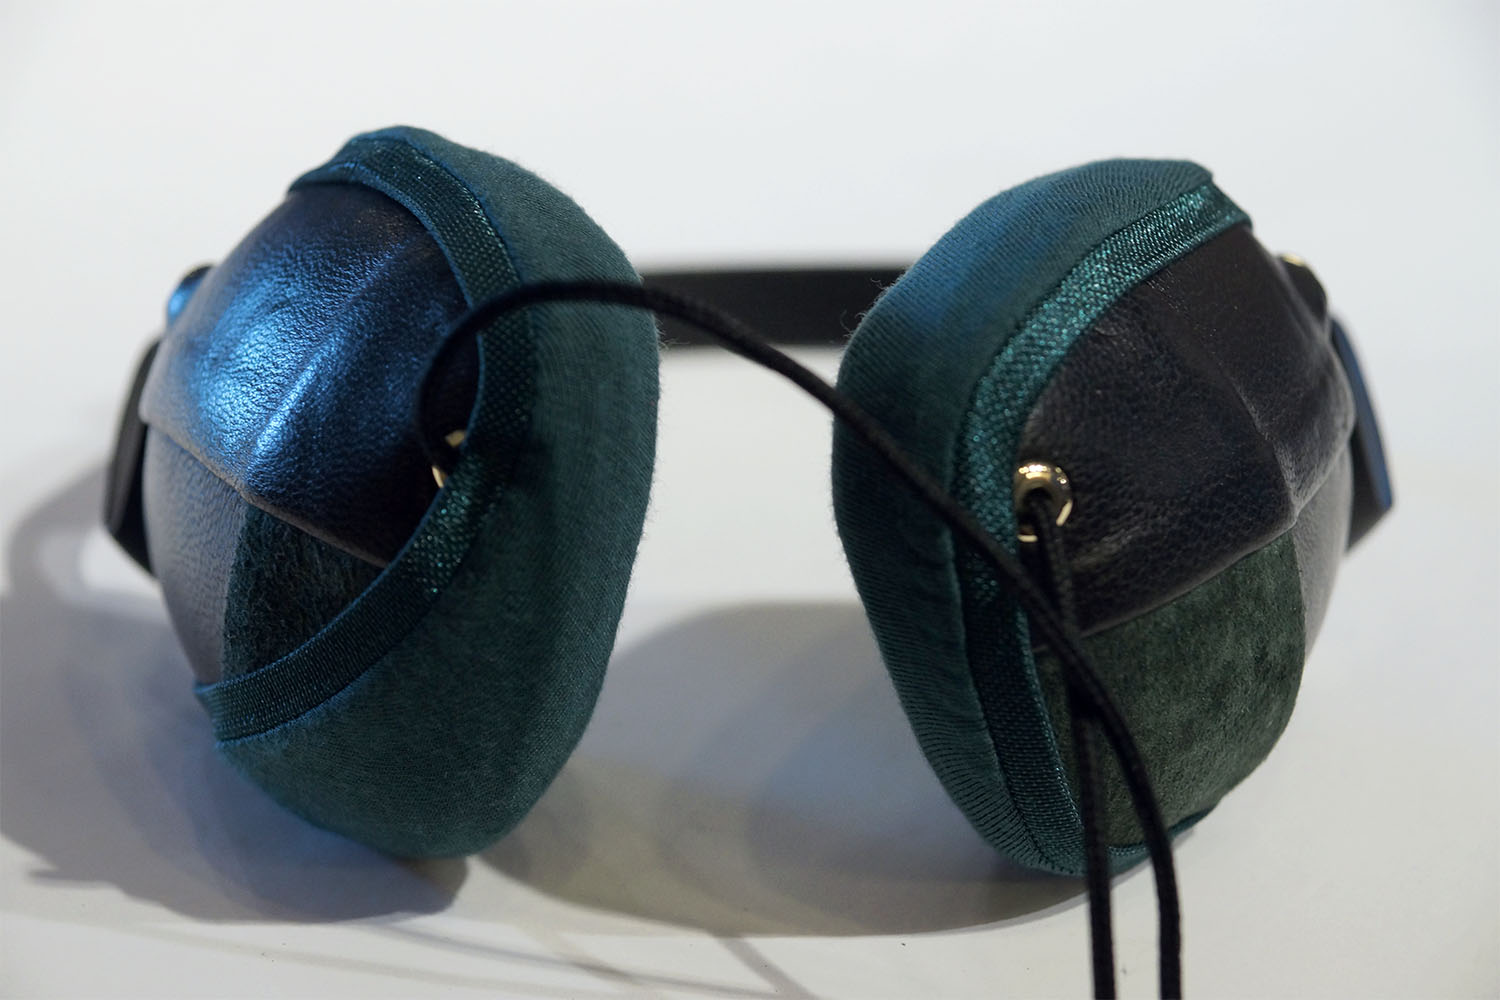 MOLAMI PLEAT earpad repair and protection: Super Stretch Headphone